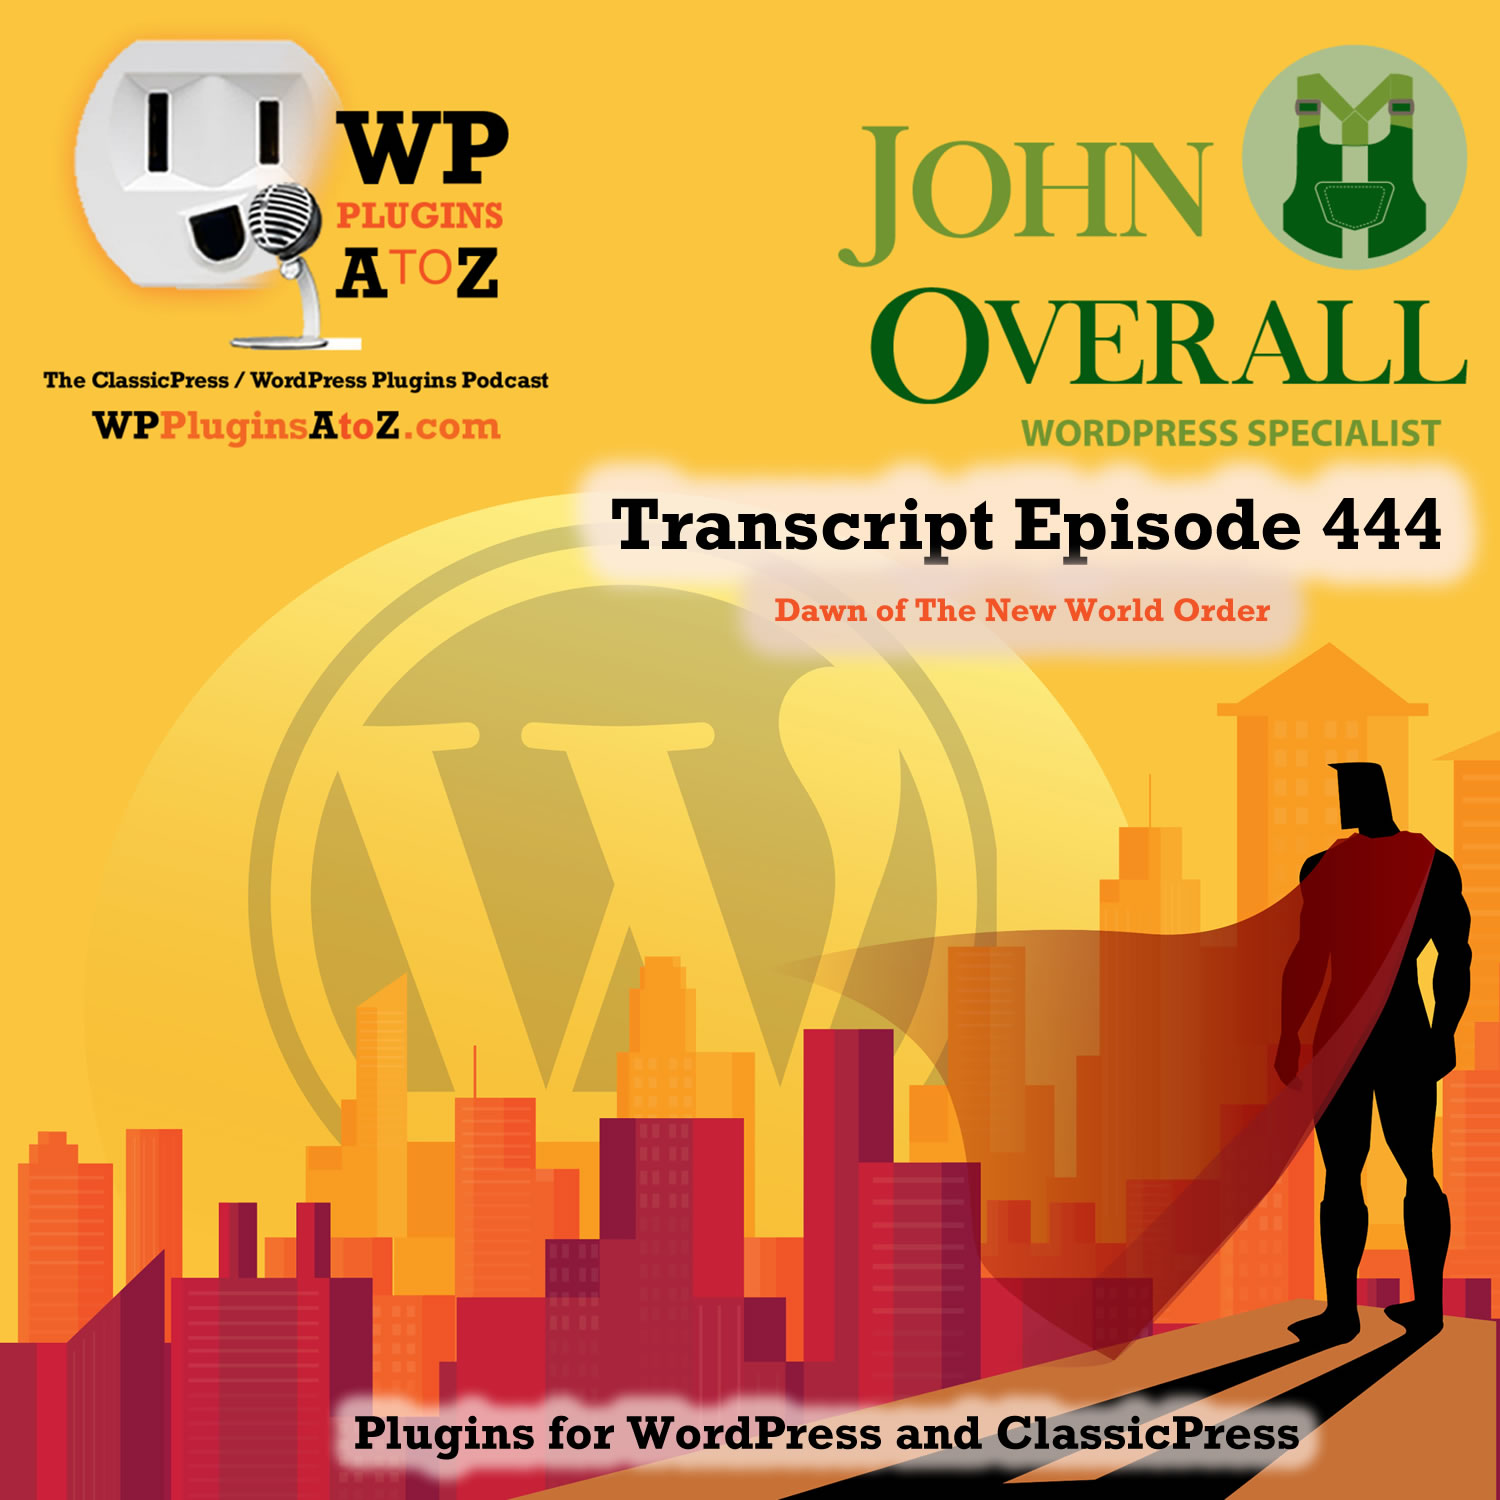 It’s Episode 444 and I’ve got plugins for Stock Photography, Lazy Loading, Newsletters, and ClassicPress Options, all coming up on WordPress Plugins A-Z!